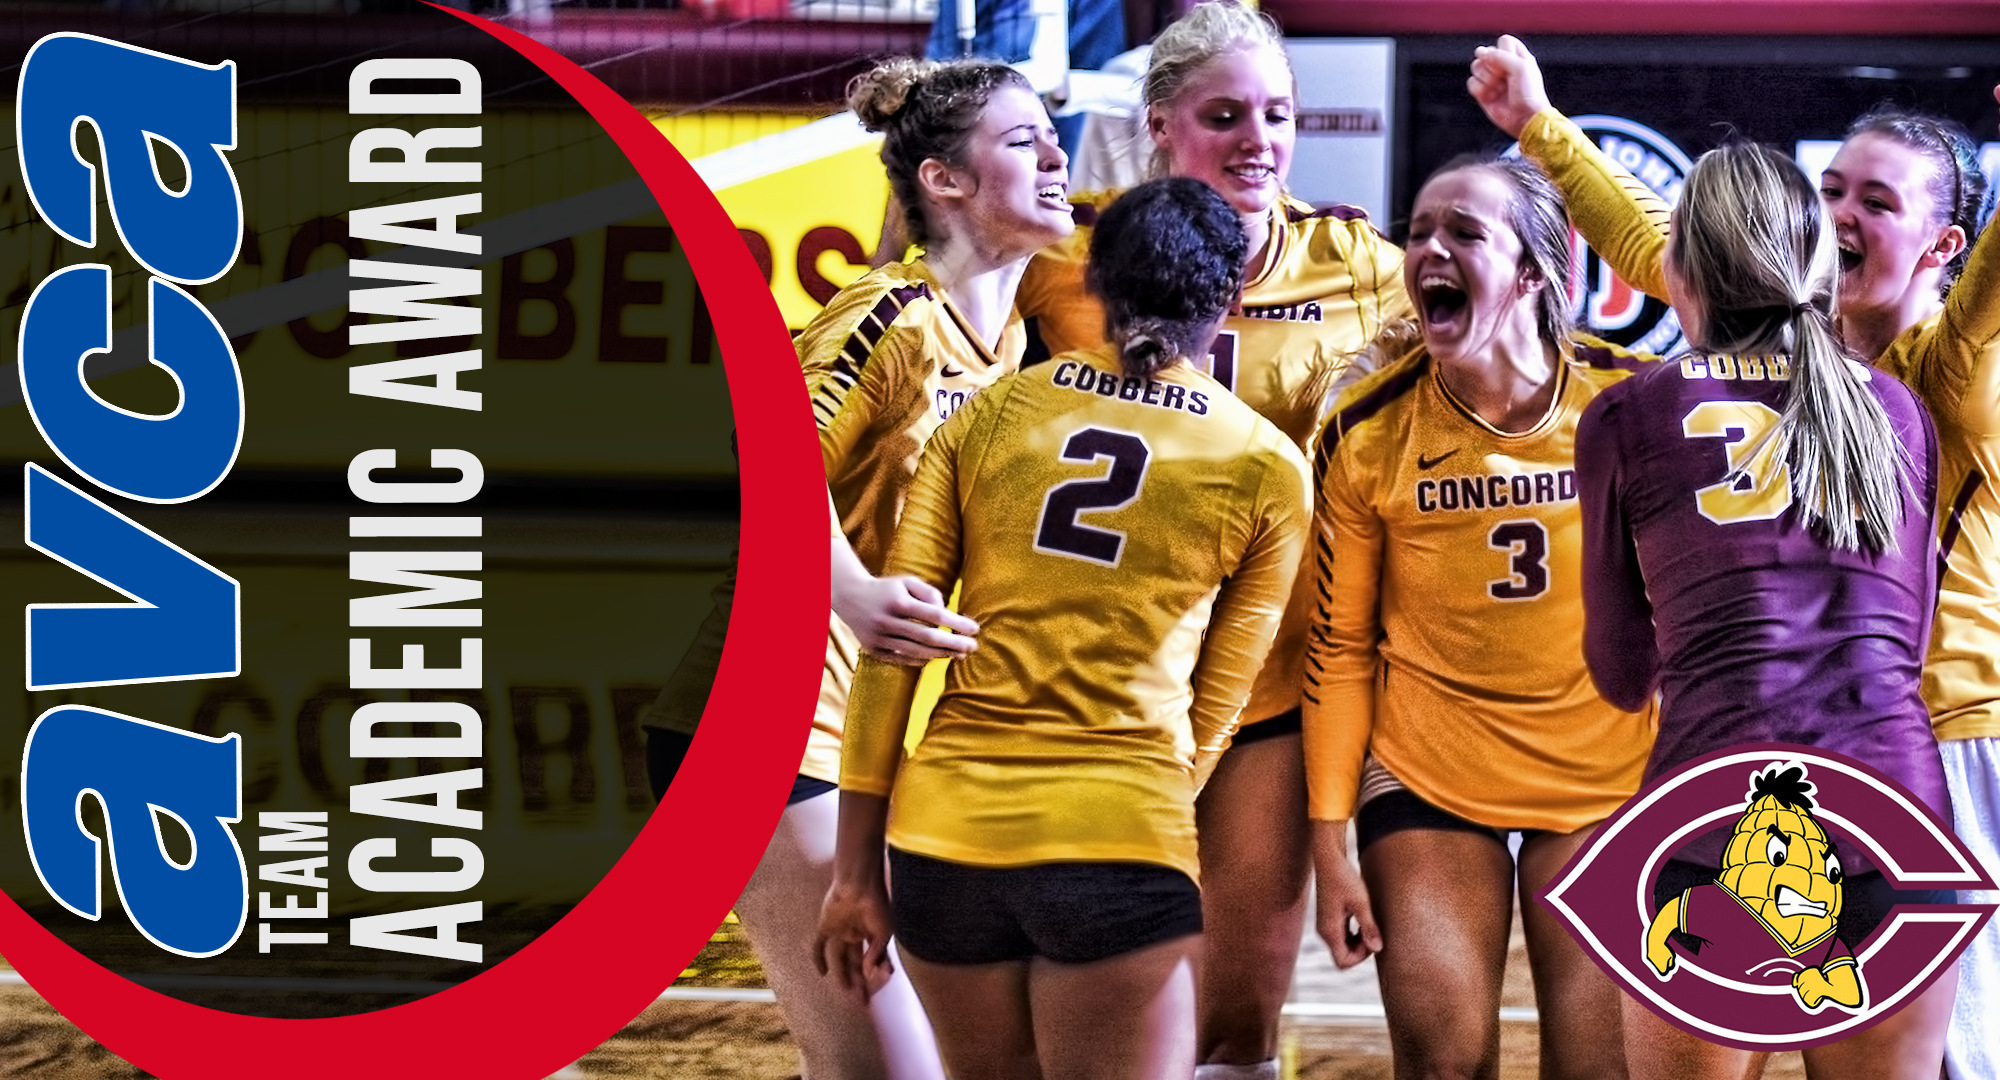 Concordia earned USMC/AVCA Team Academic honors for the first time in program history.